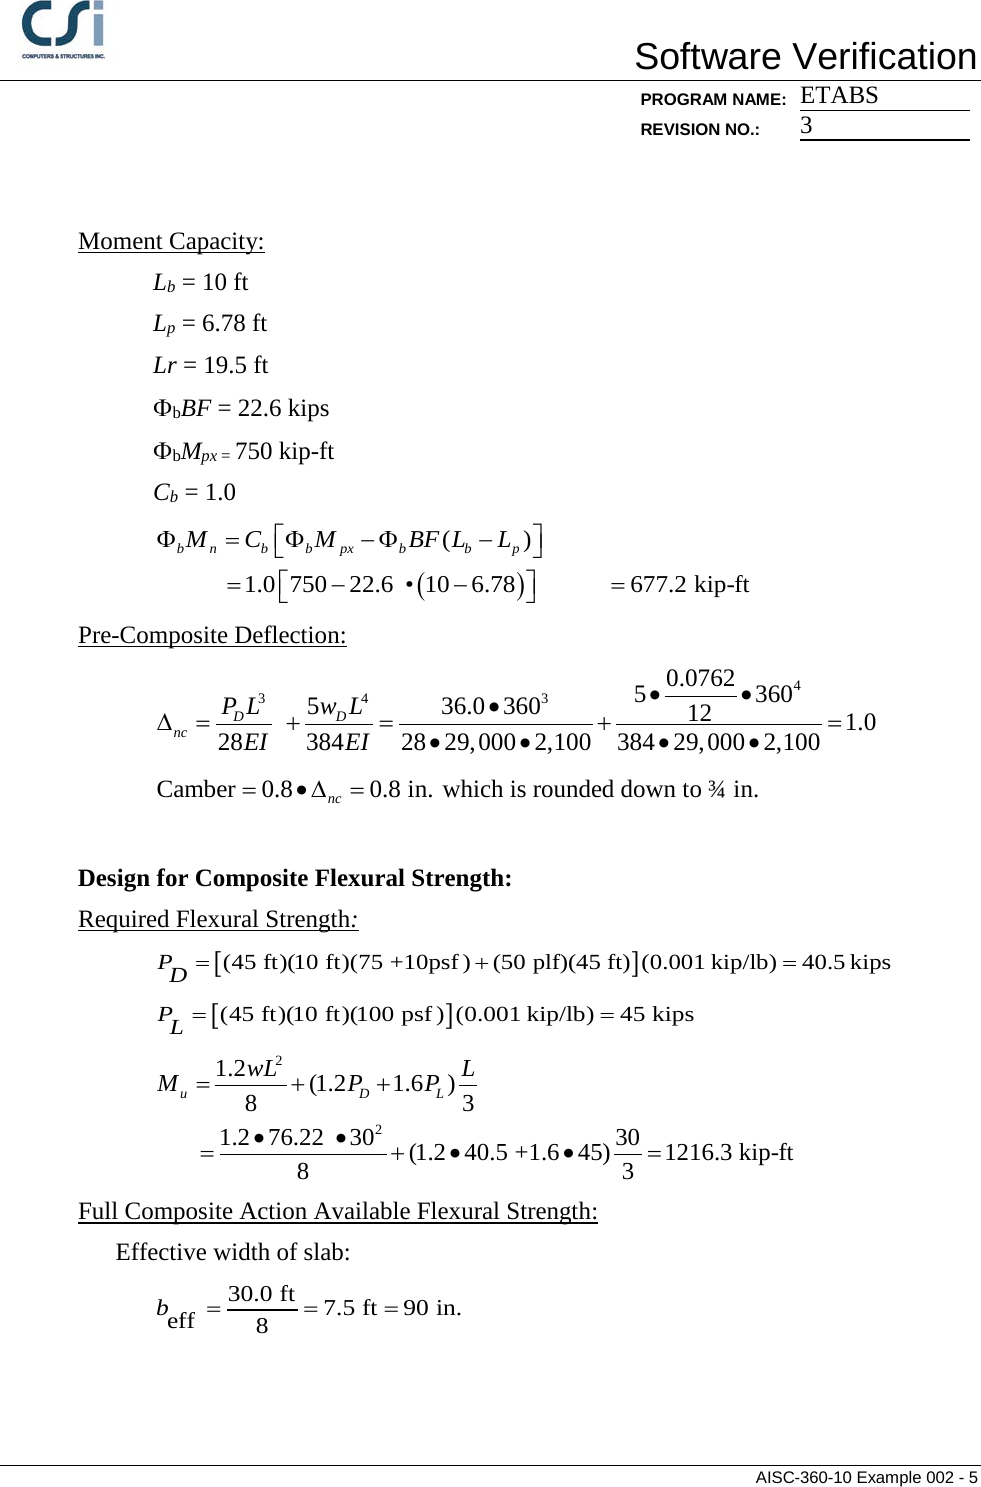 Page 5 of 8 - Contents AISC-360-10 Example 002